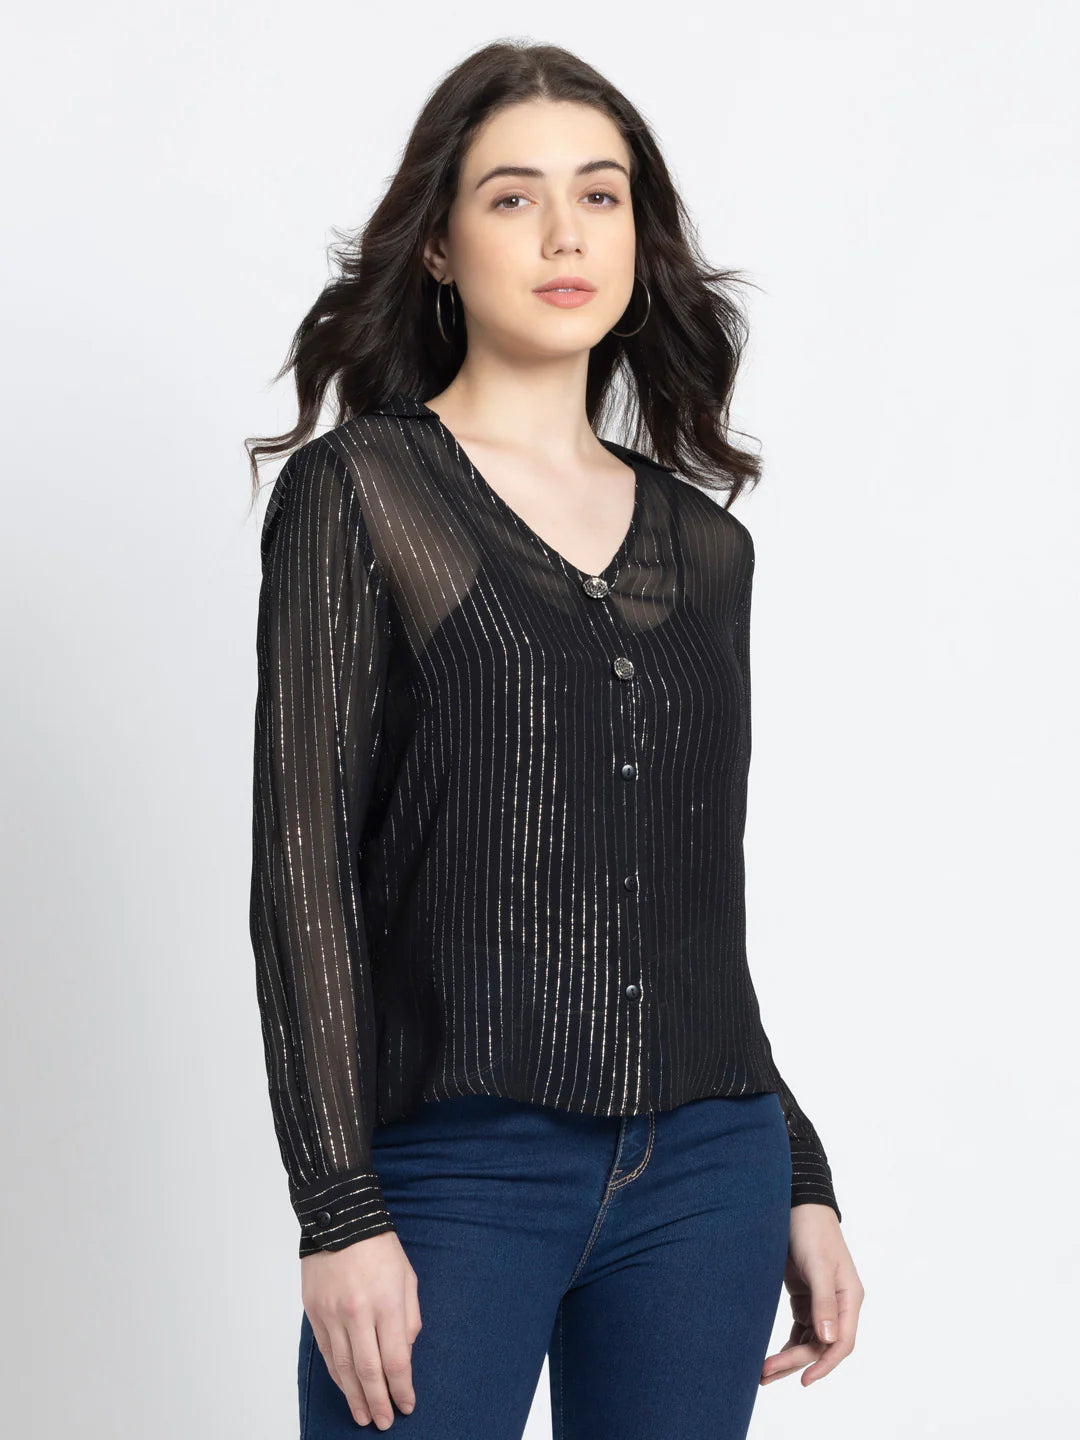 Black Party Shirt for Women | Embroidered Black Party Shirt